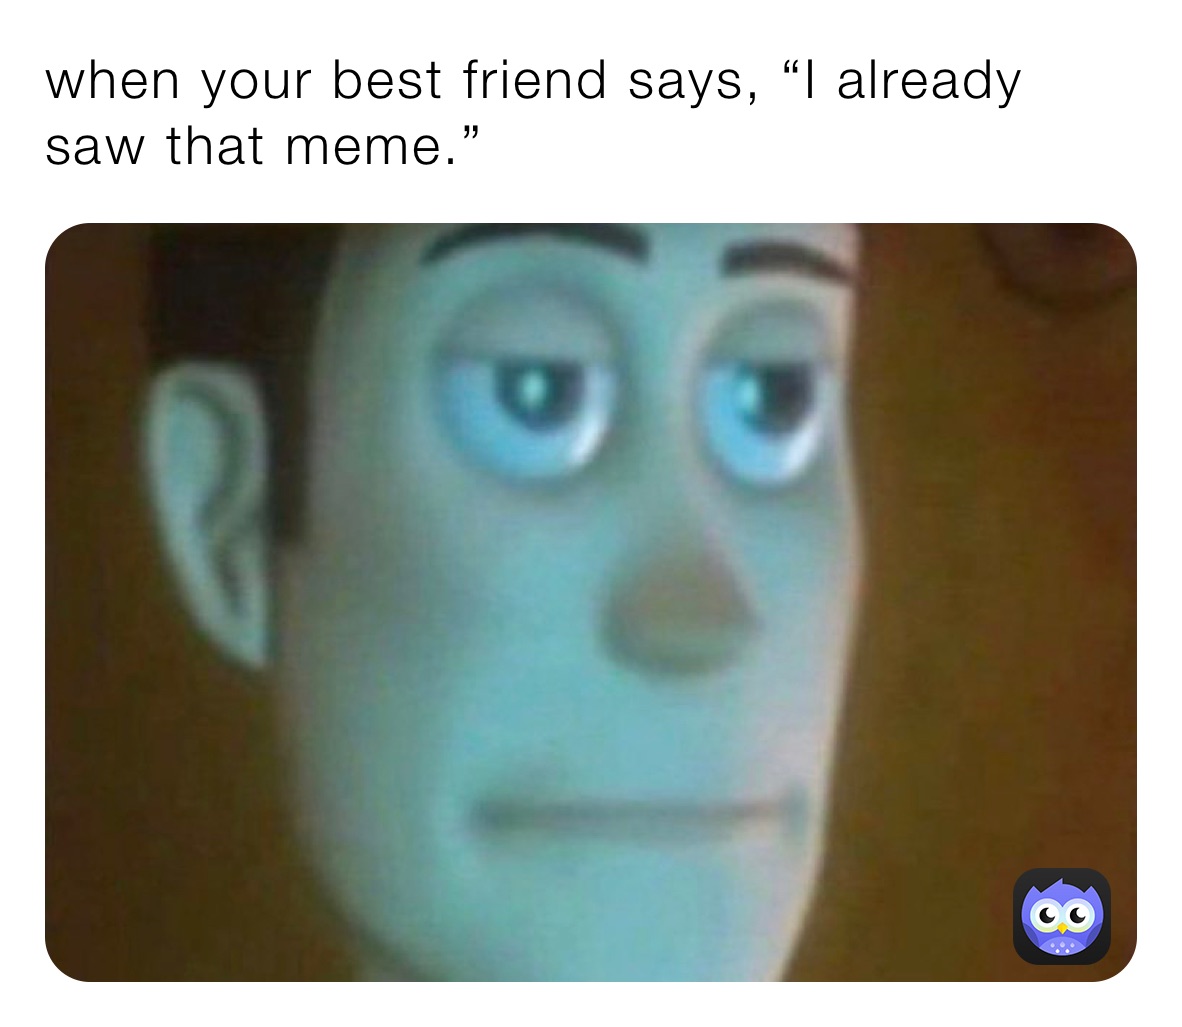 when your best friend says, “I already saw that meme.”